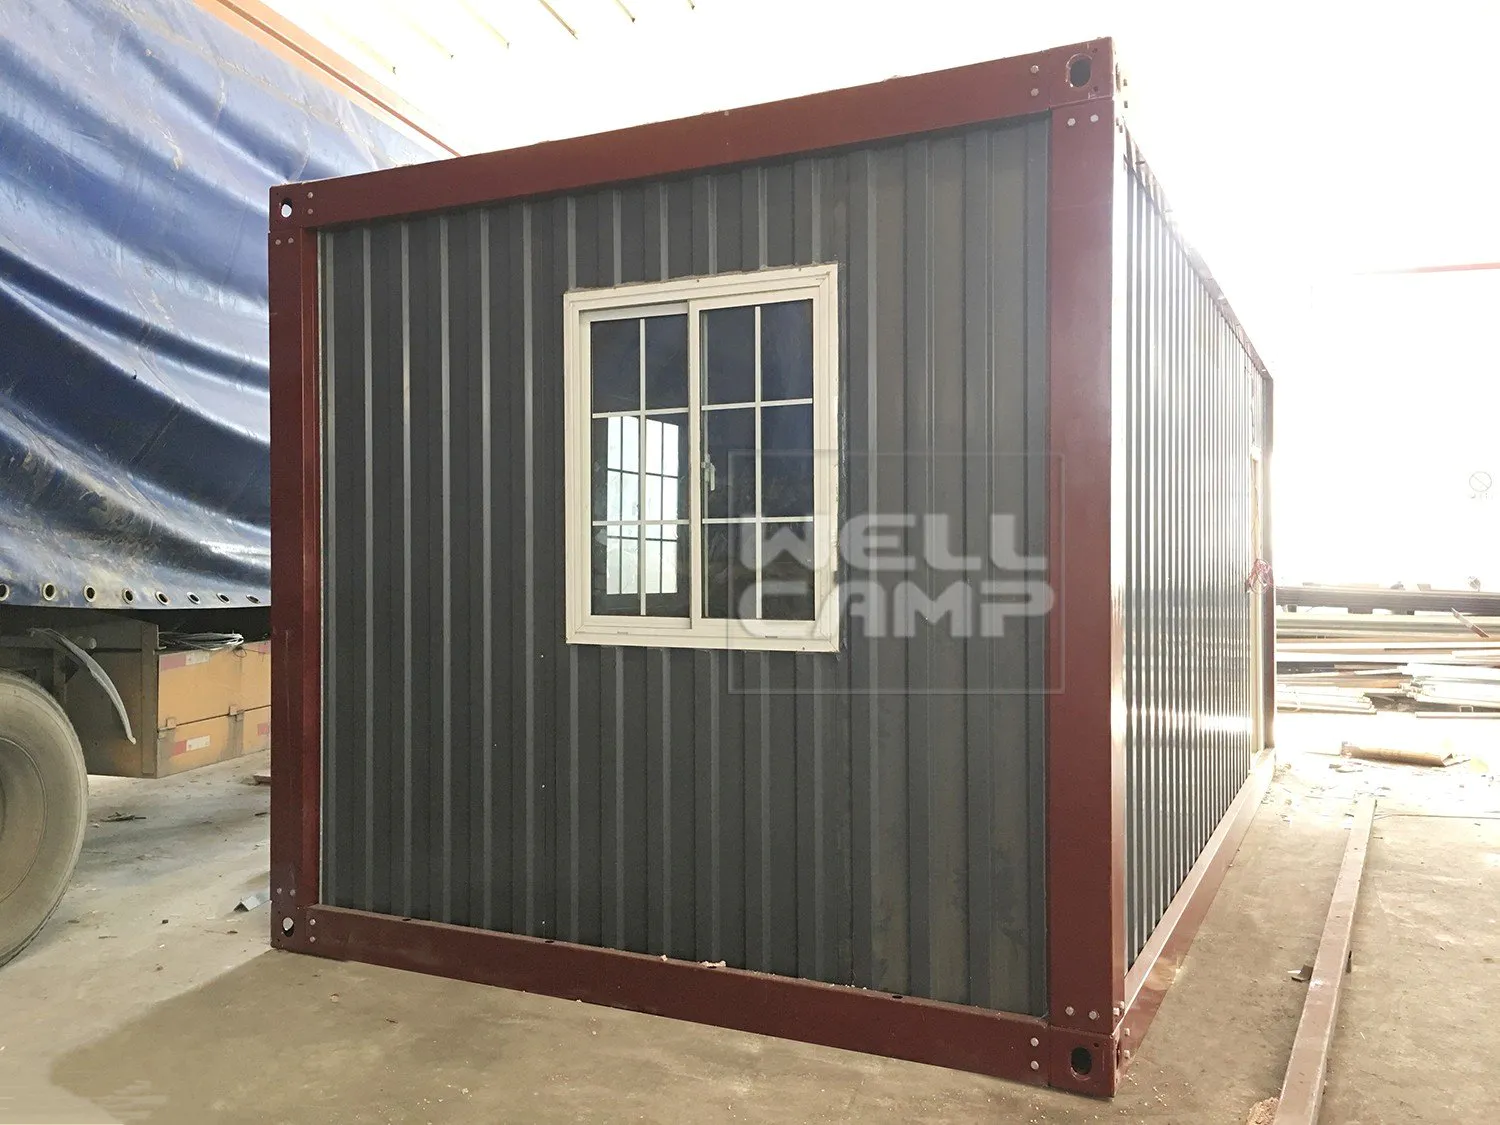 portable prefab container house online for renting